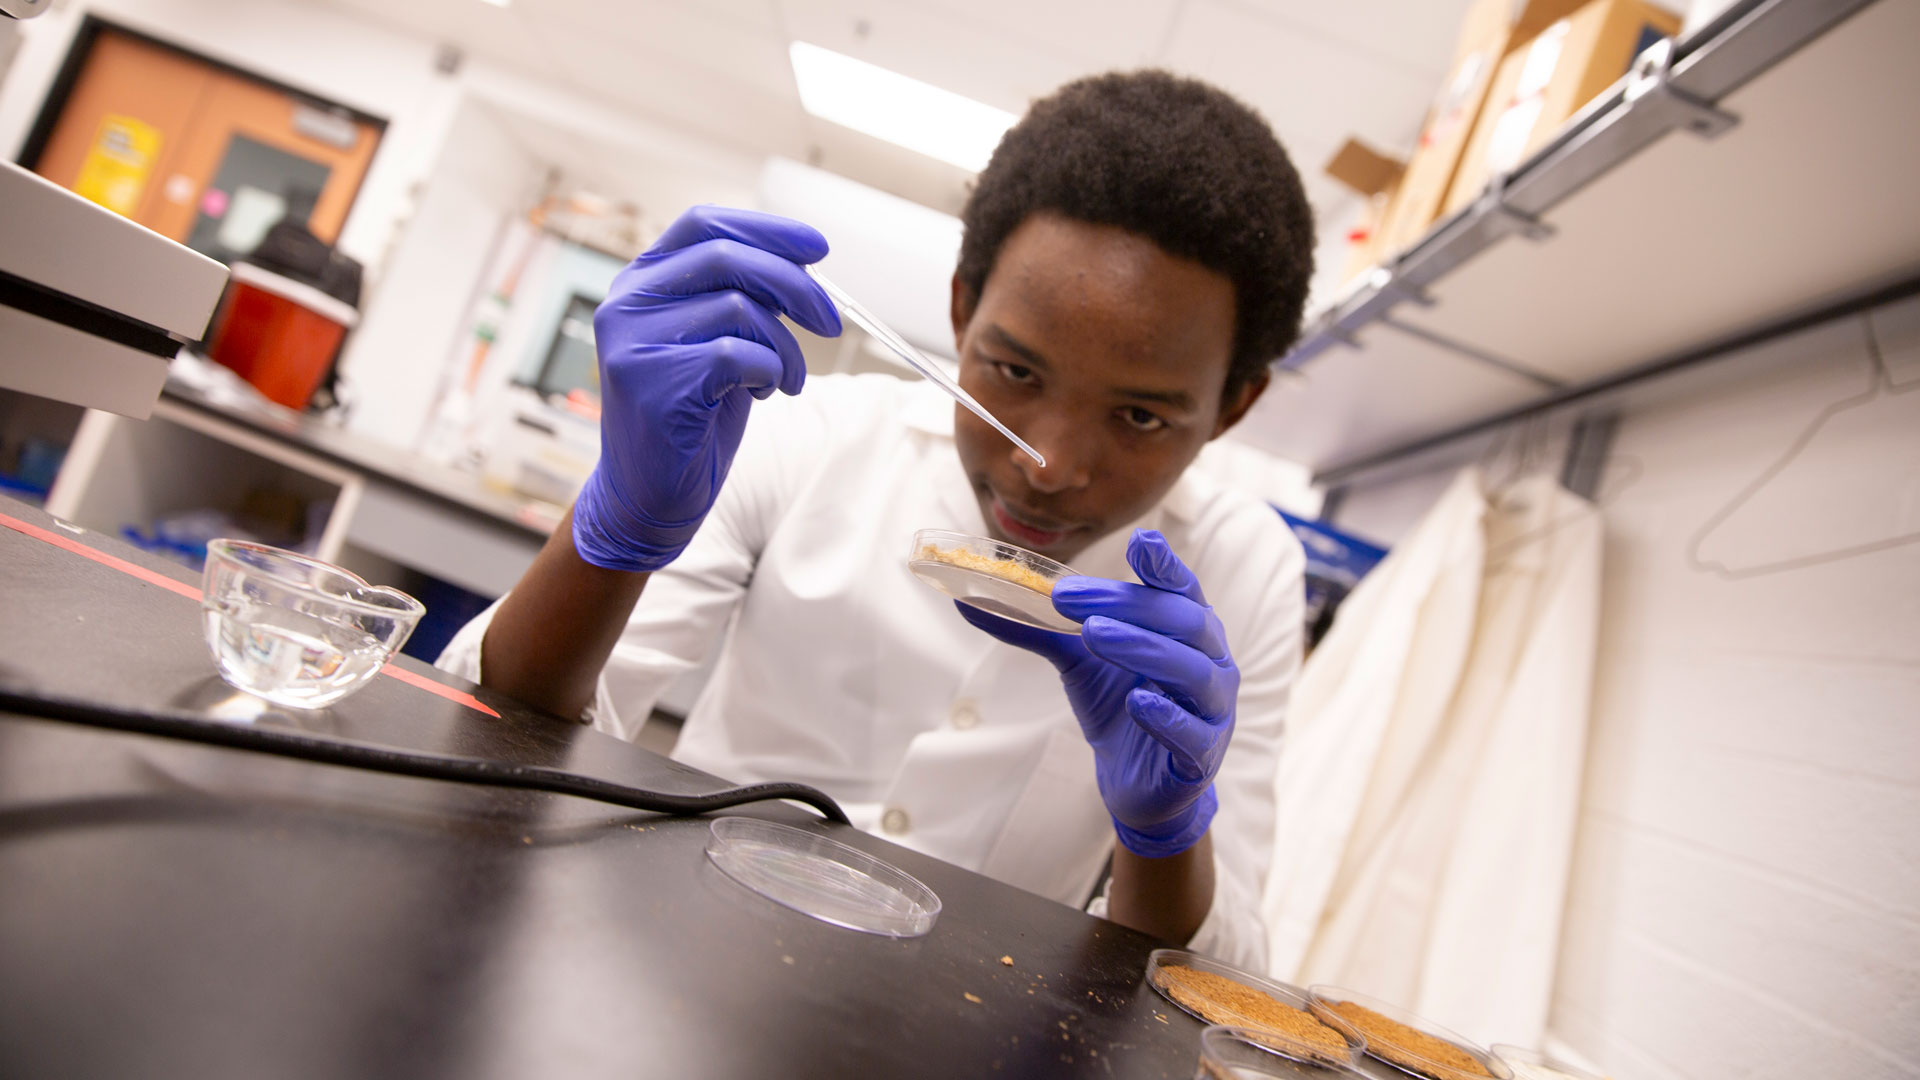 ASU student Henry Nakaana works in a lab for his FURI research project.